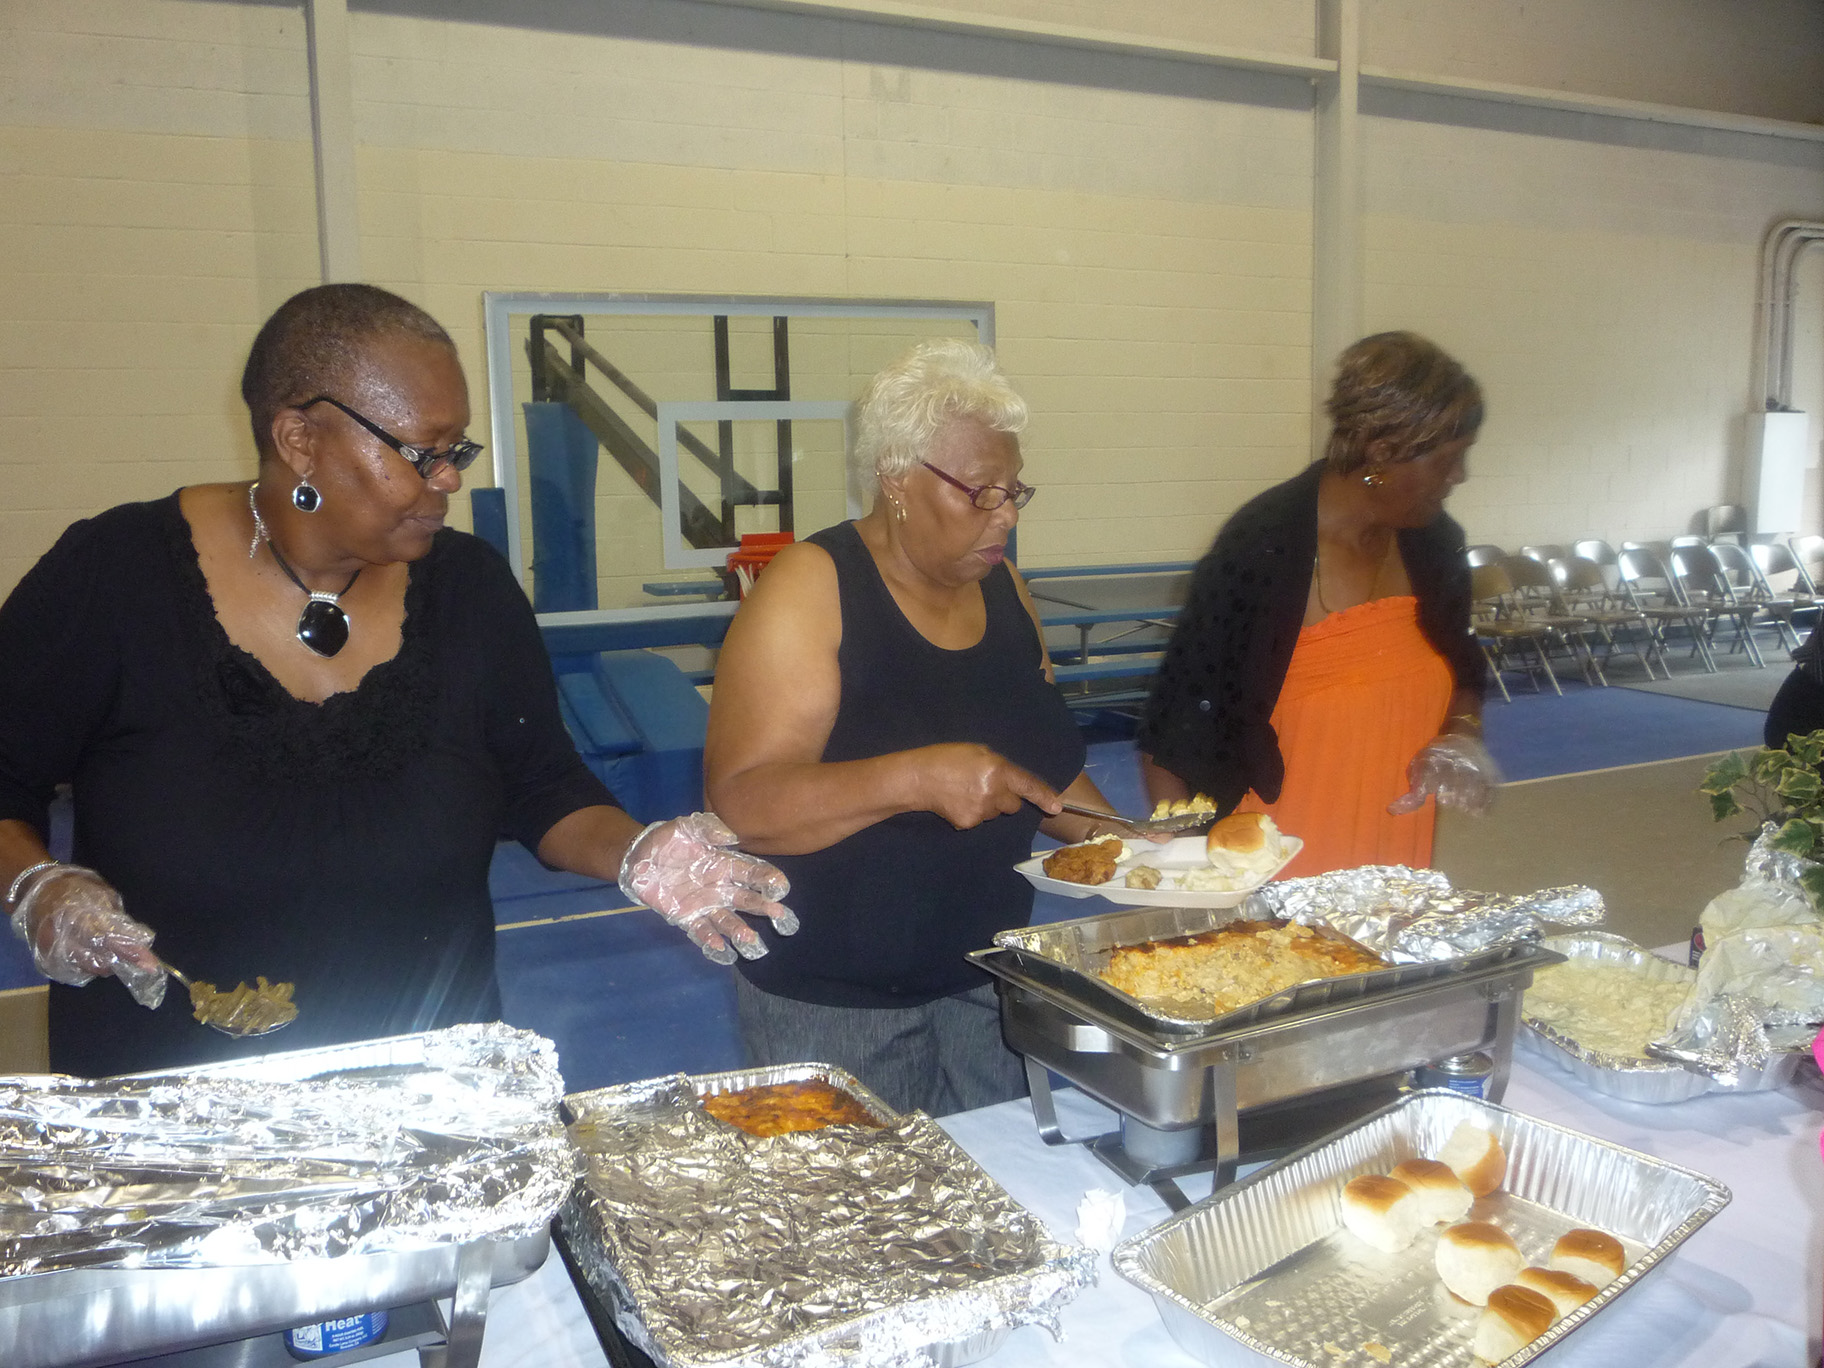 Ladies serving food at an event